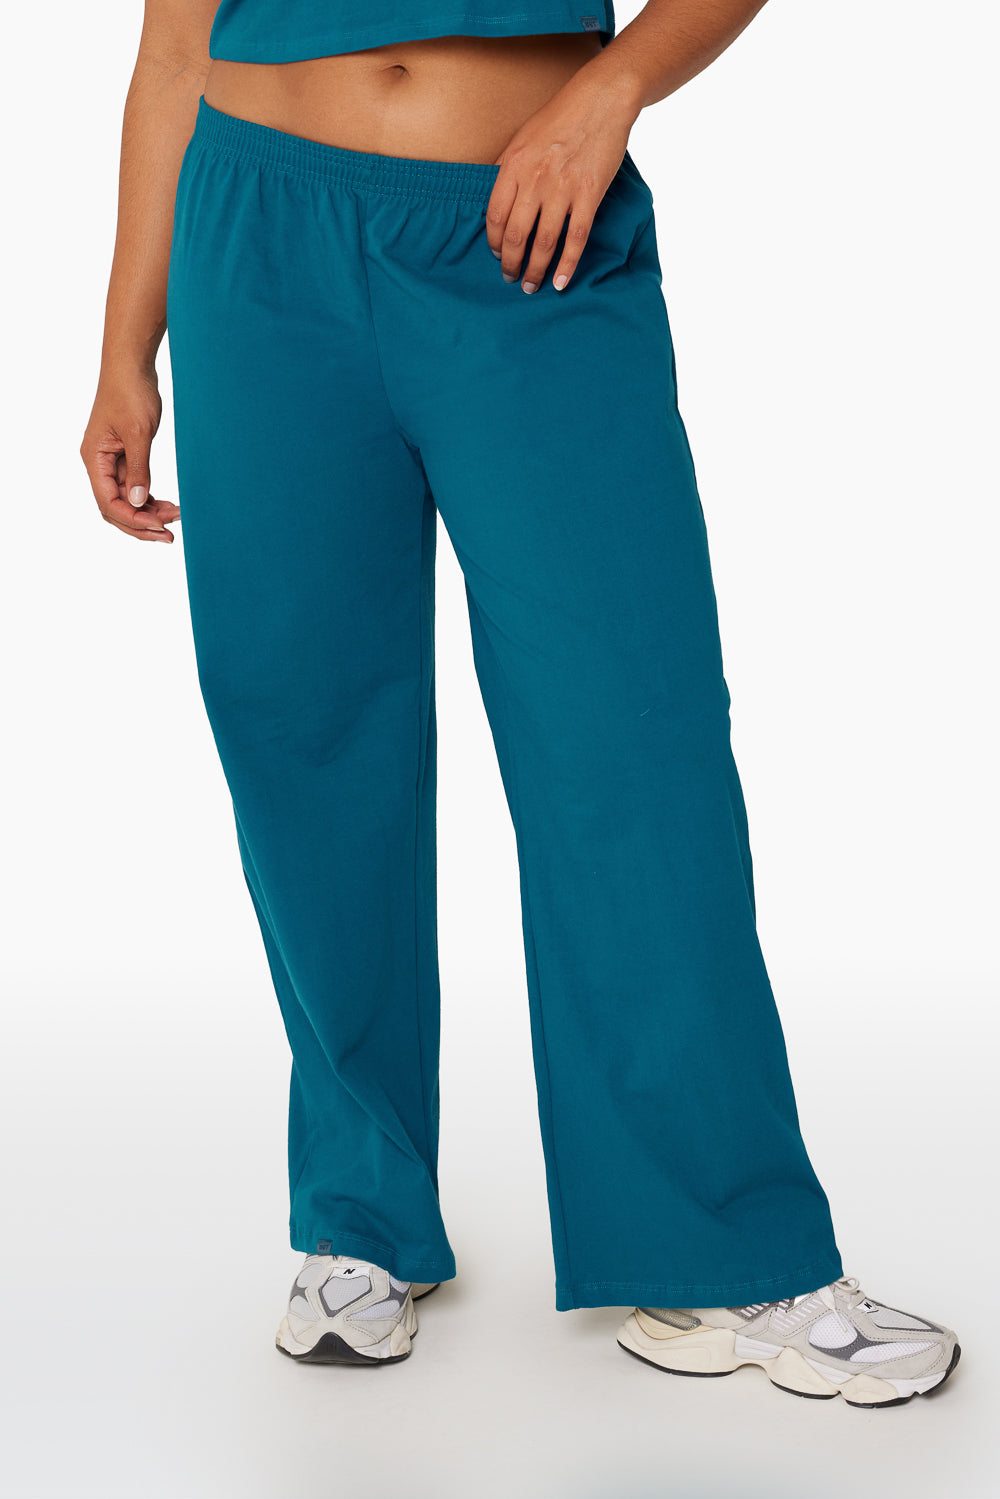 HEAVY COTTON EASY PANTS - COVE Featured Image